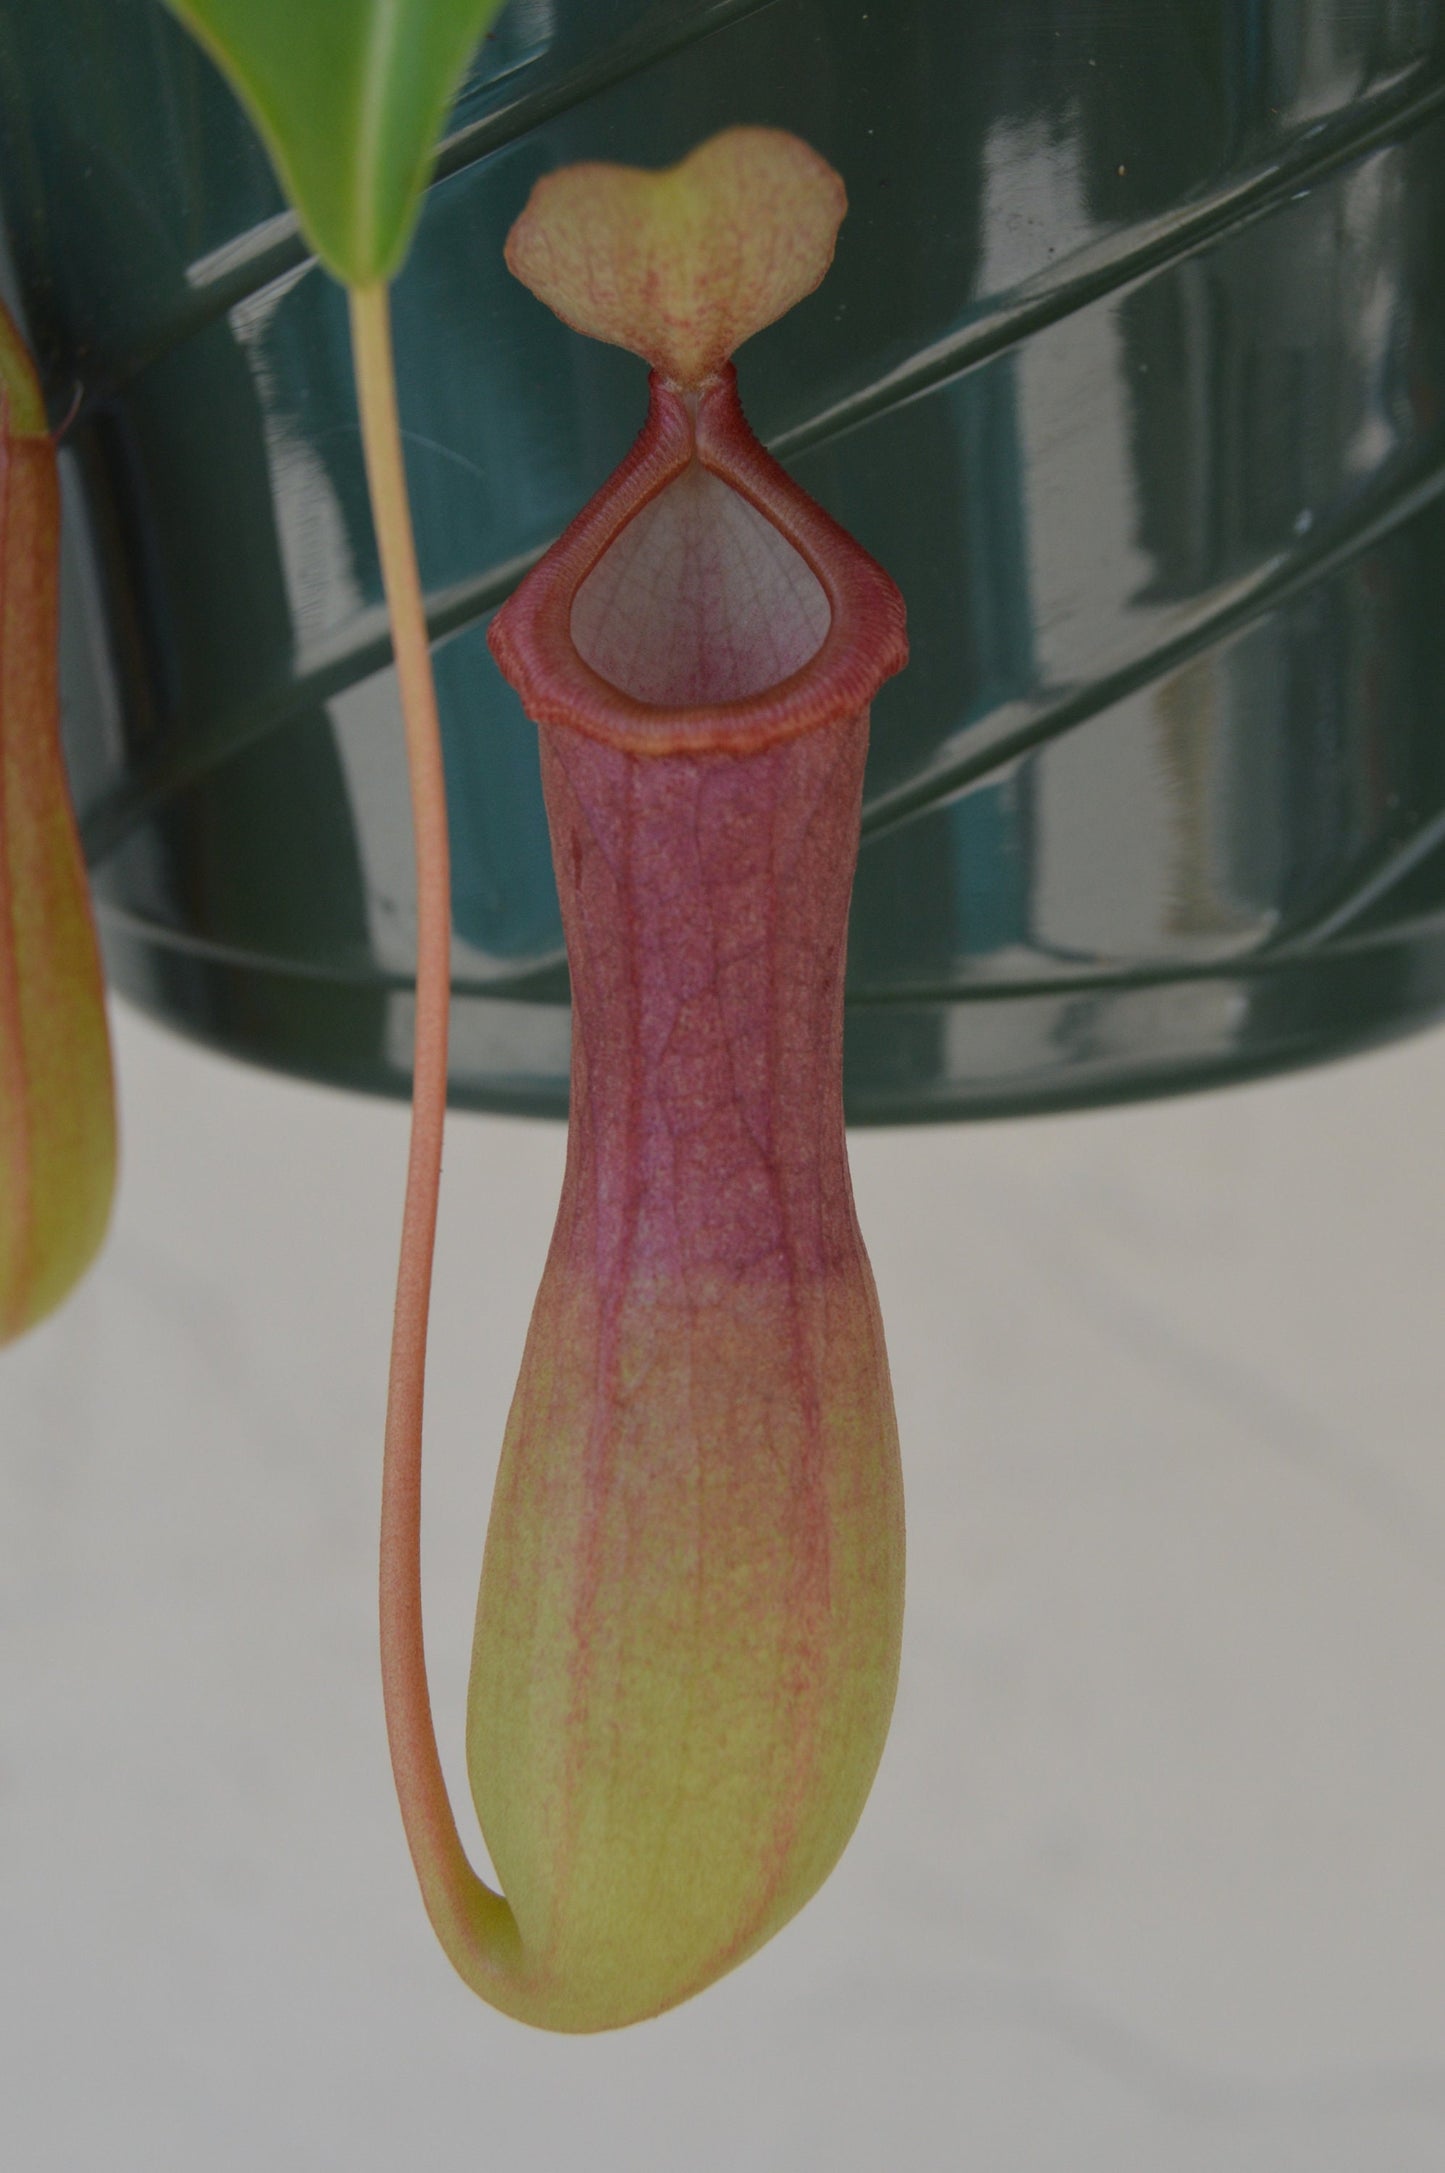  nepenthes alata carnivorous pitcher plant 6 inch hanging basket easy to grow with multiple red and green pitchers with long slender leaves